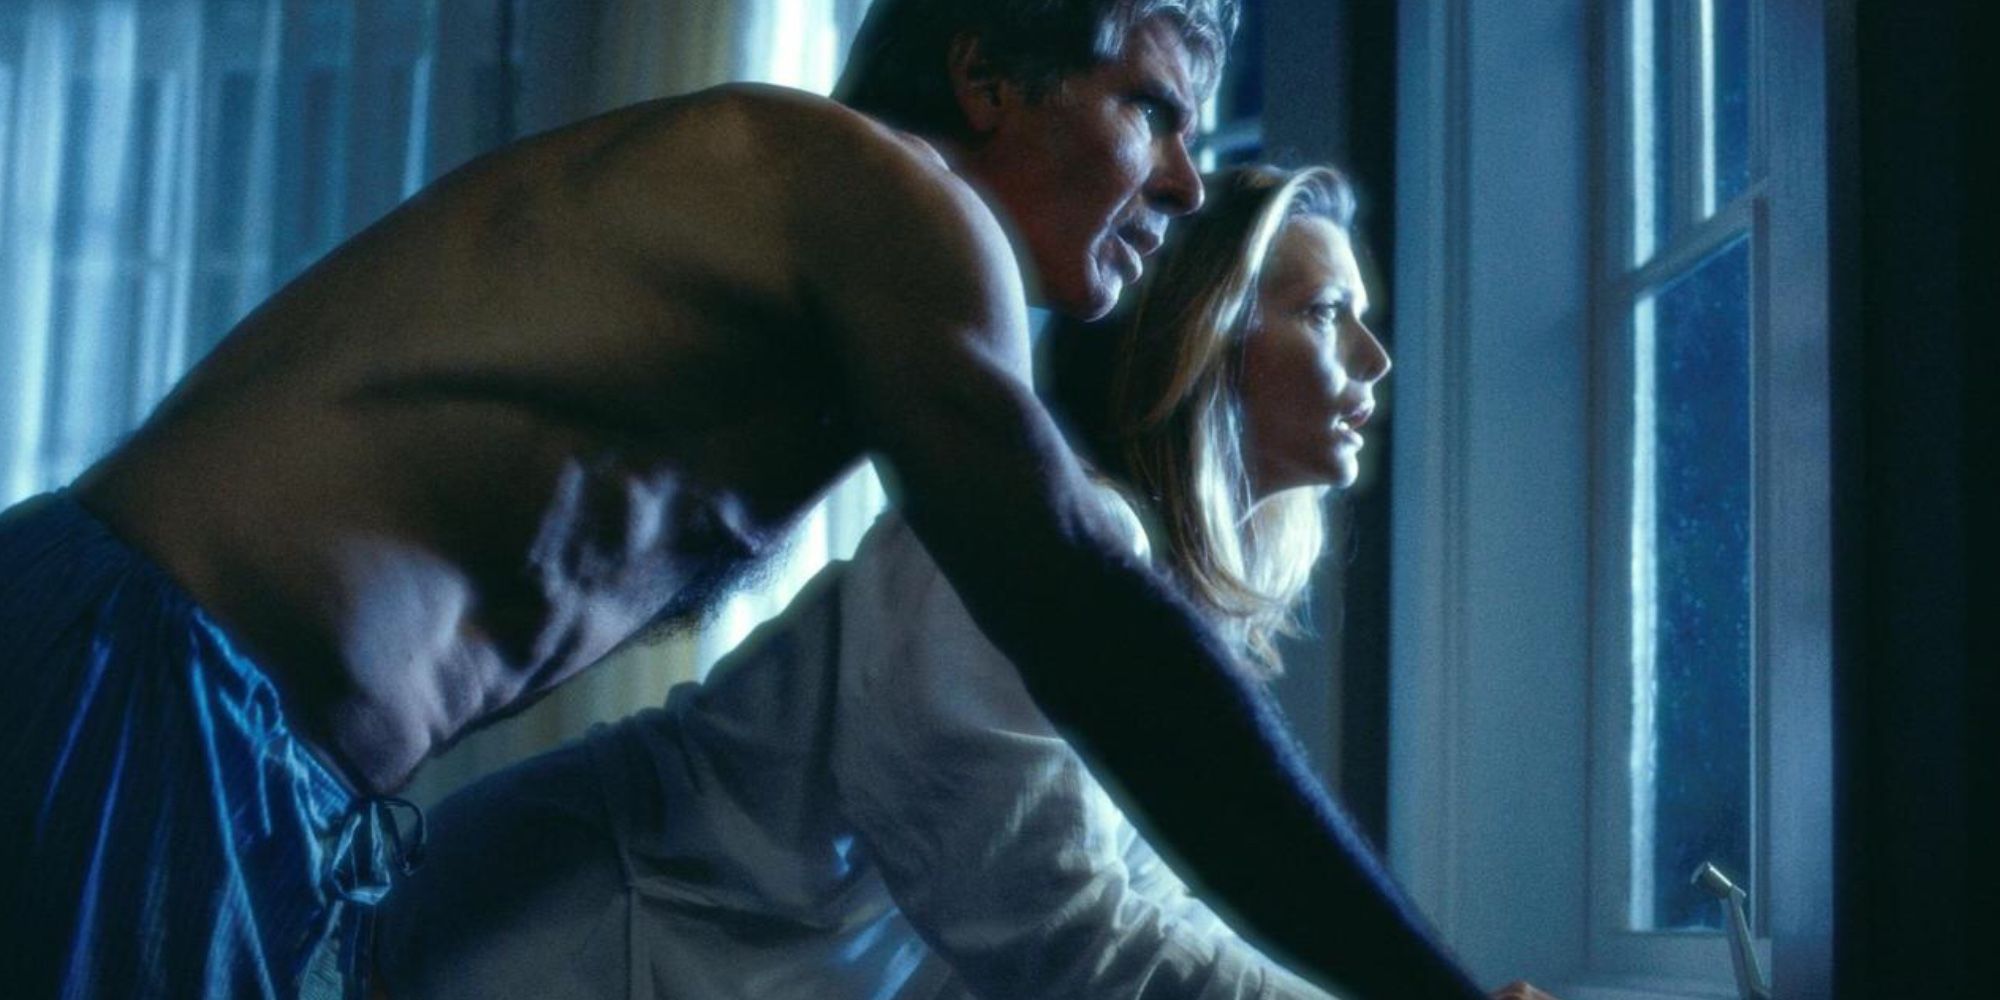 Harrison Ford and Michelle Pfeiffer looking out window